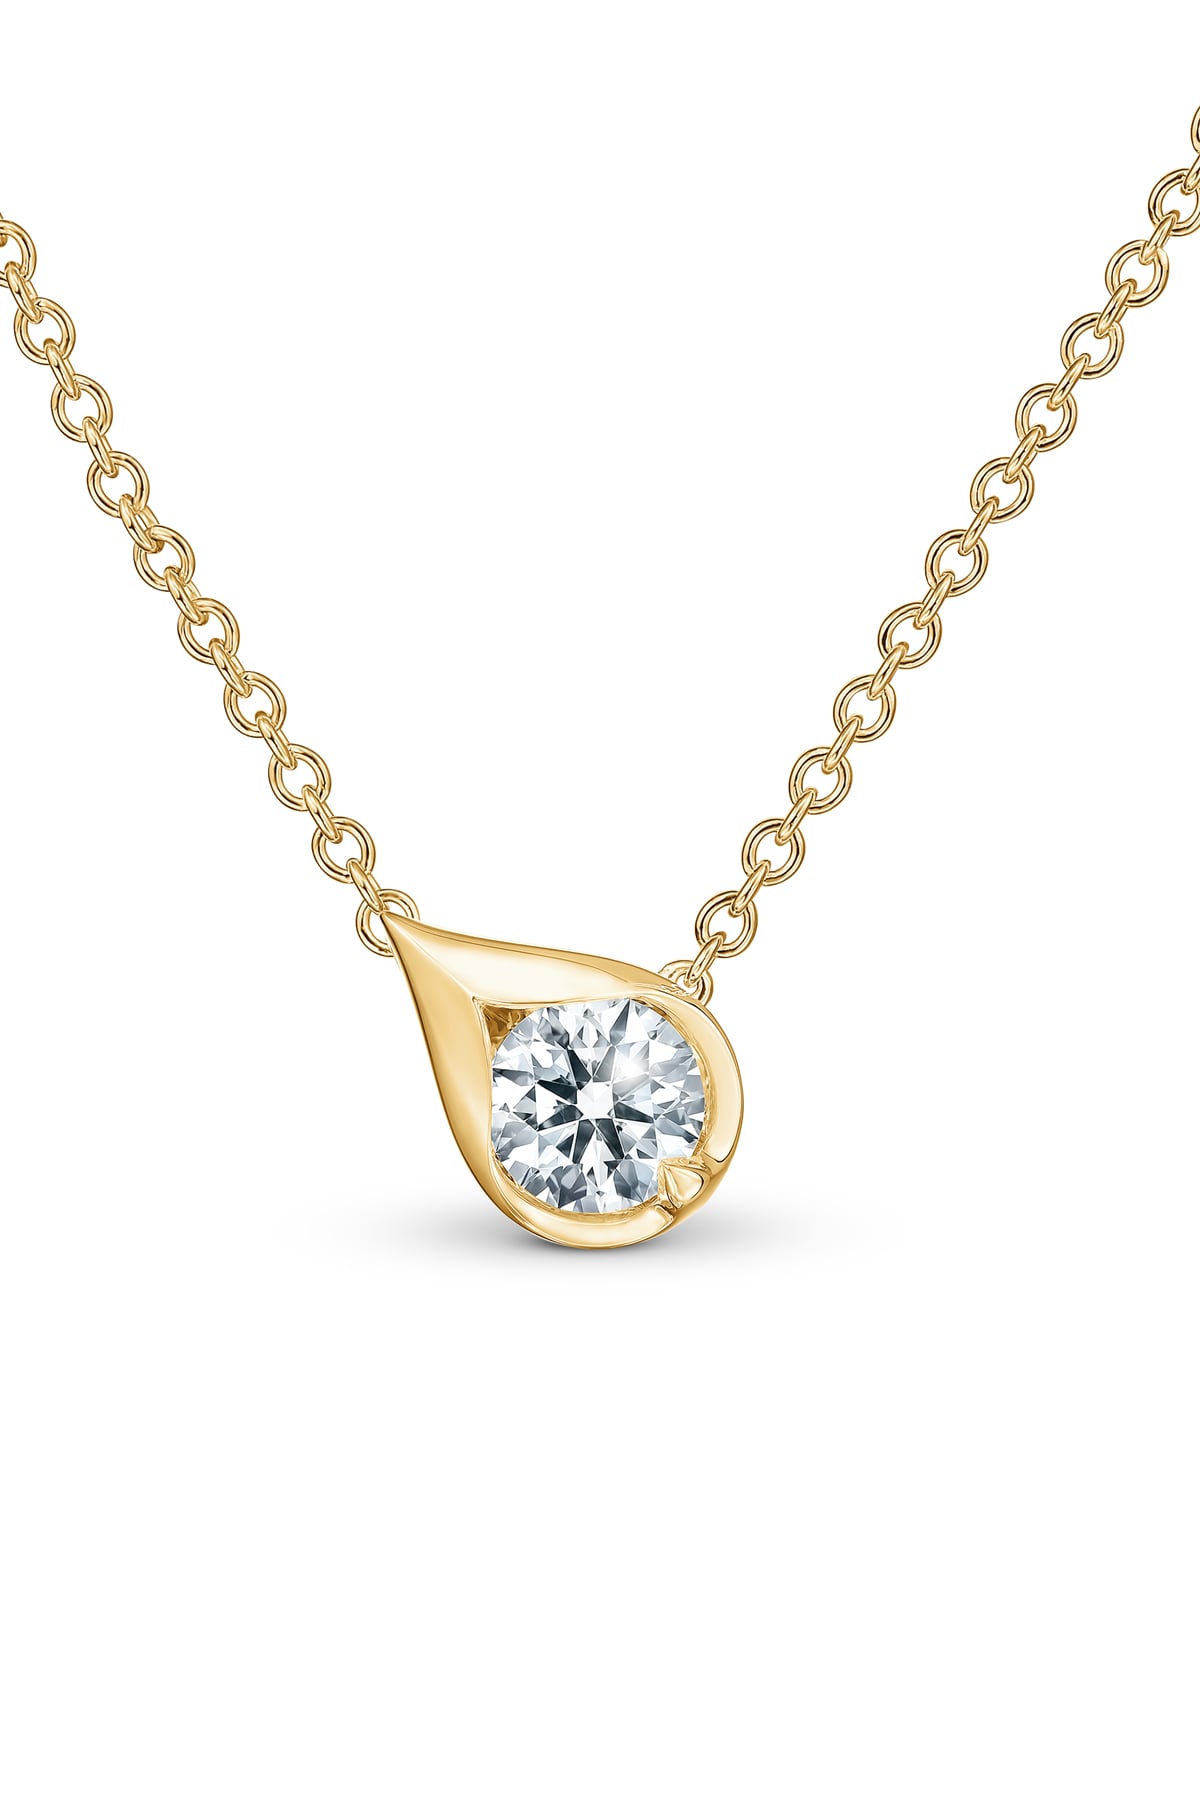 LU Droplet Pendant In Yellow Gold From Hearts On Fire exclusive to LeGassick Jewellery, Gold Coast, Australia.